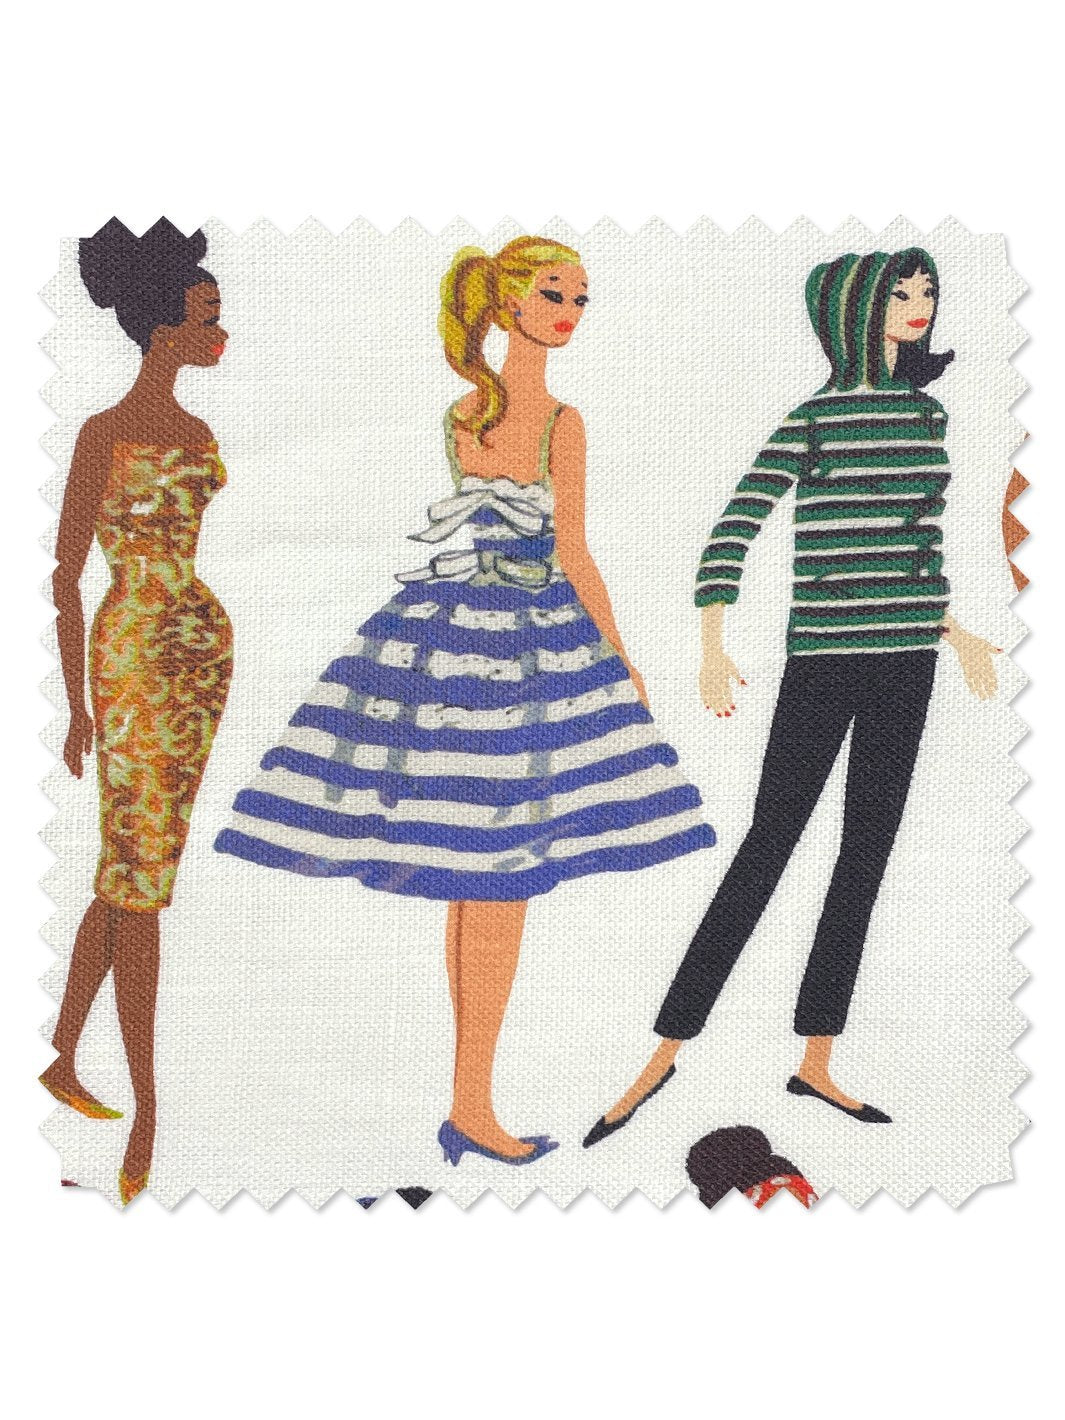 'Fabric by the Yard - Vintage Illustration - White